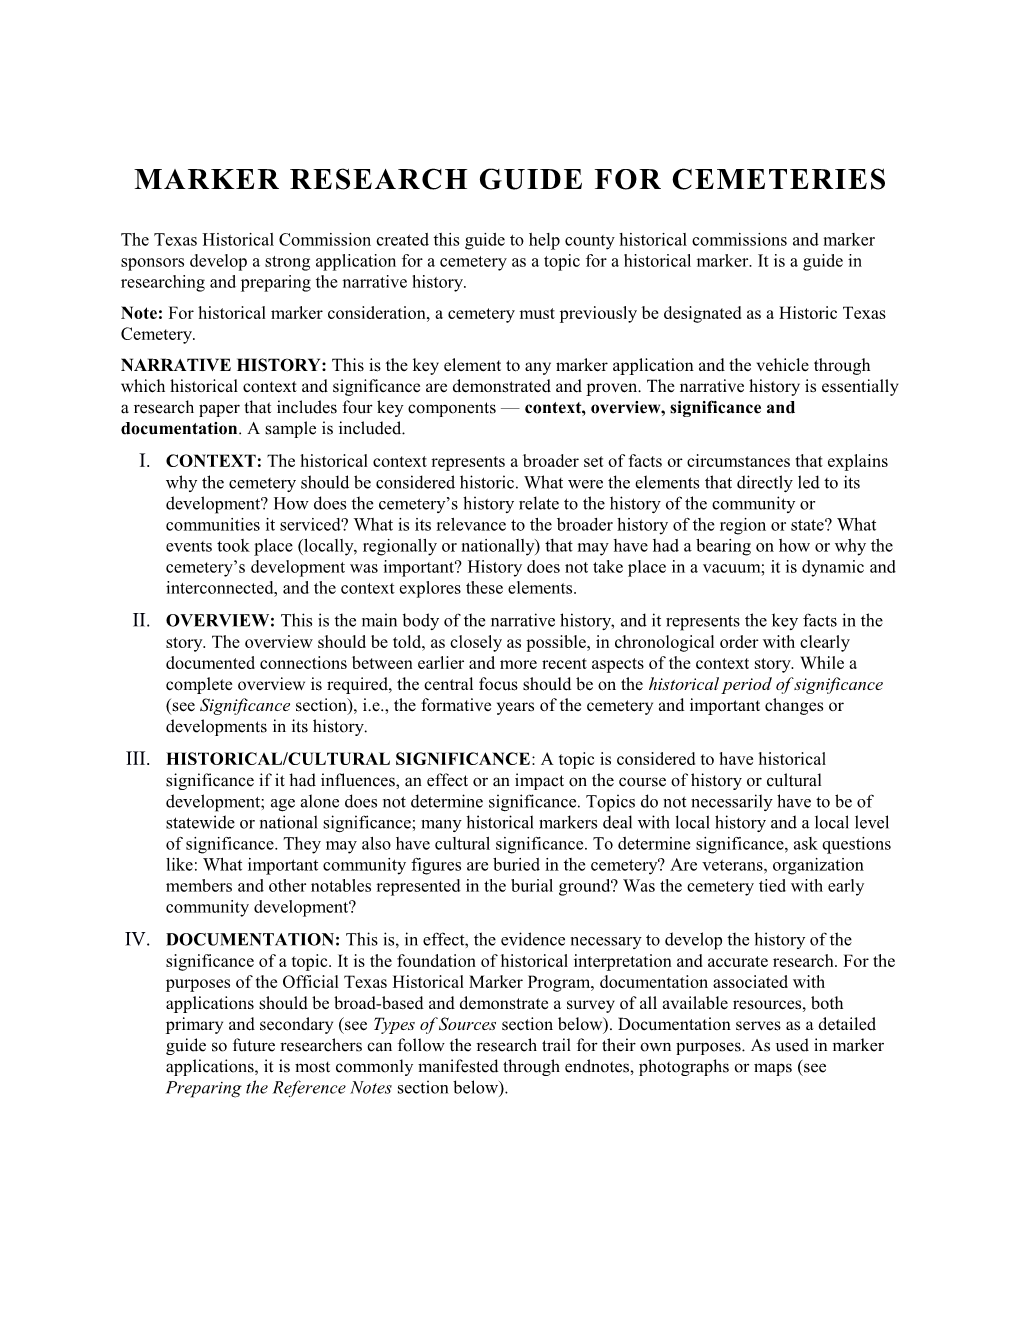 Marker Research Guide for Cemeteries